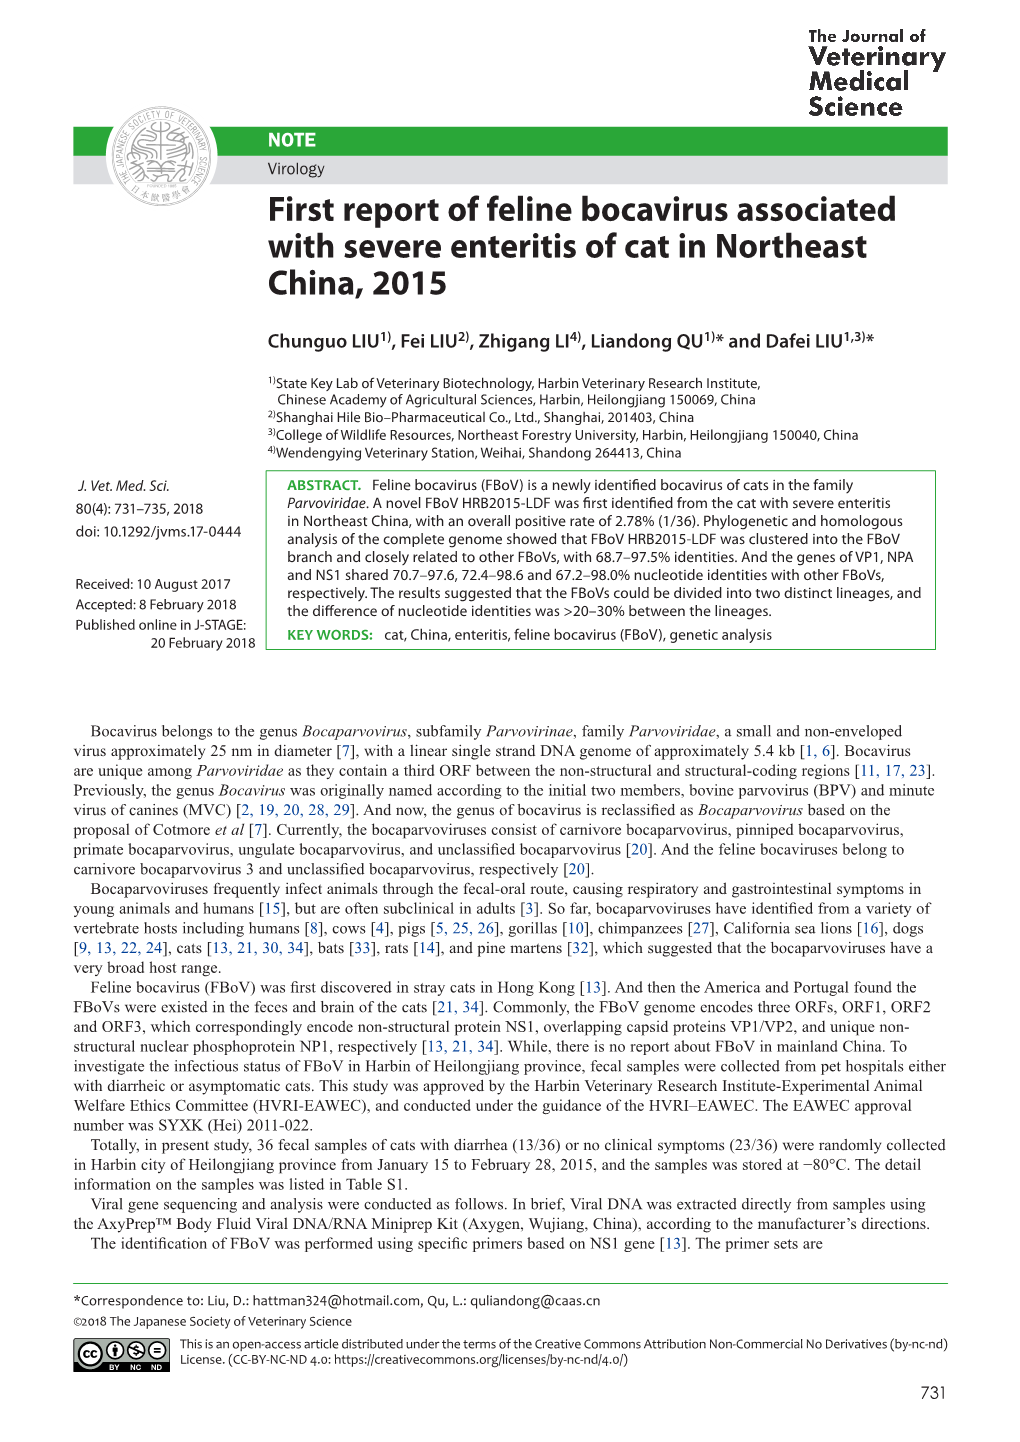 First Report of Feline Bocavirus Associated with Severe Enteritis of Cat in Northeast China, 2015